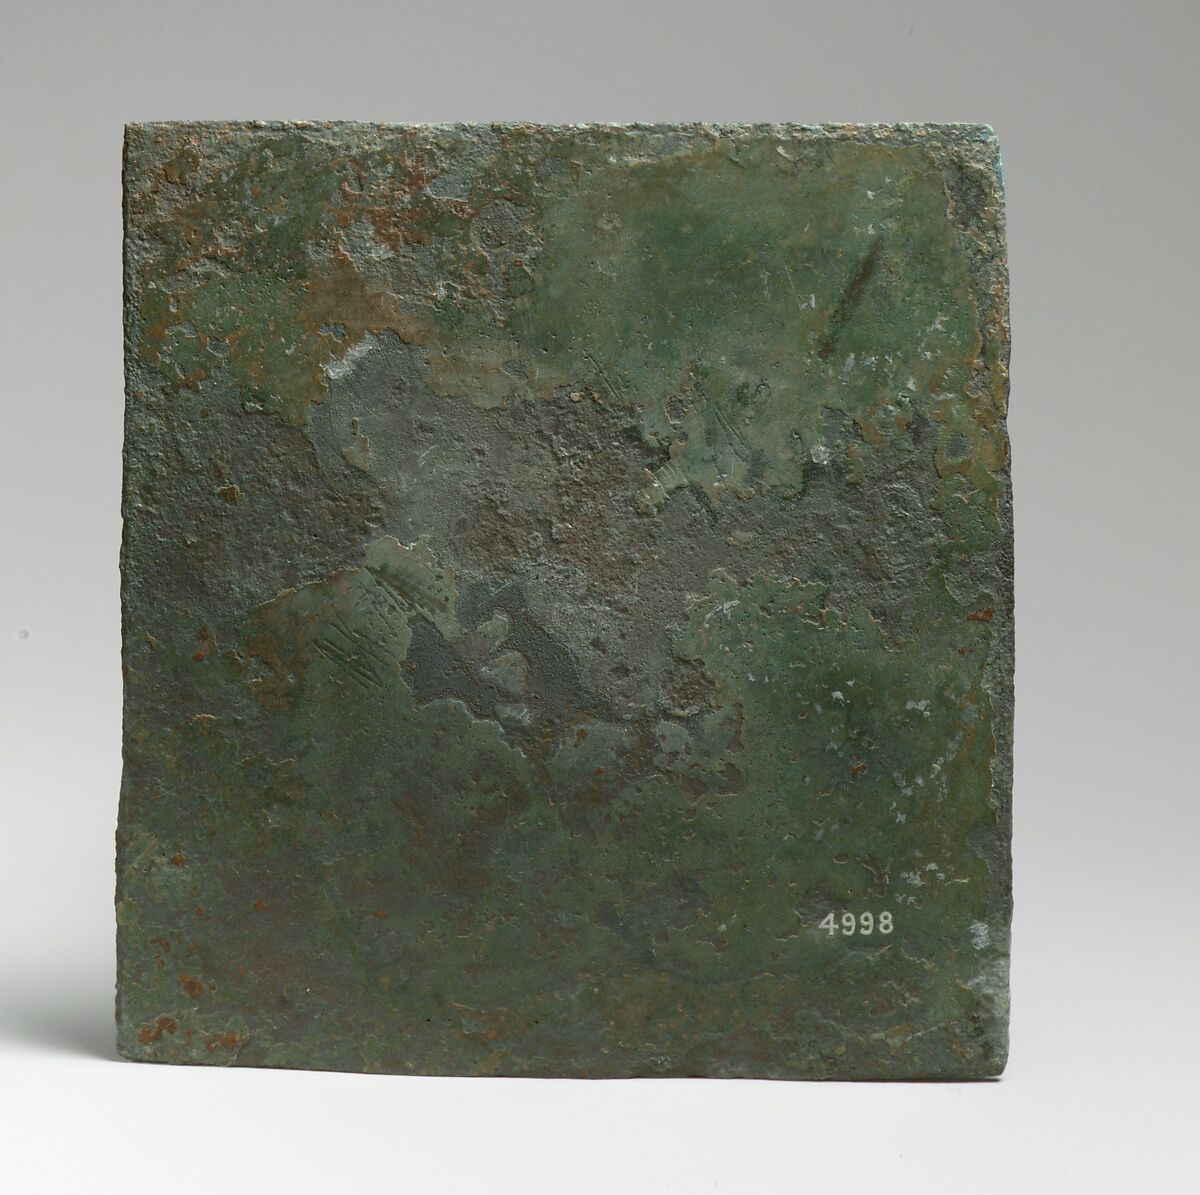 Mirror ? or plate, Bronze 